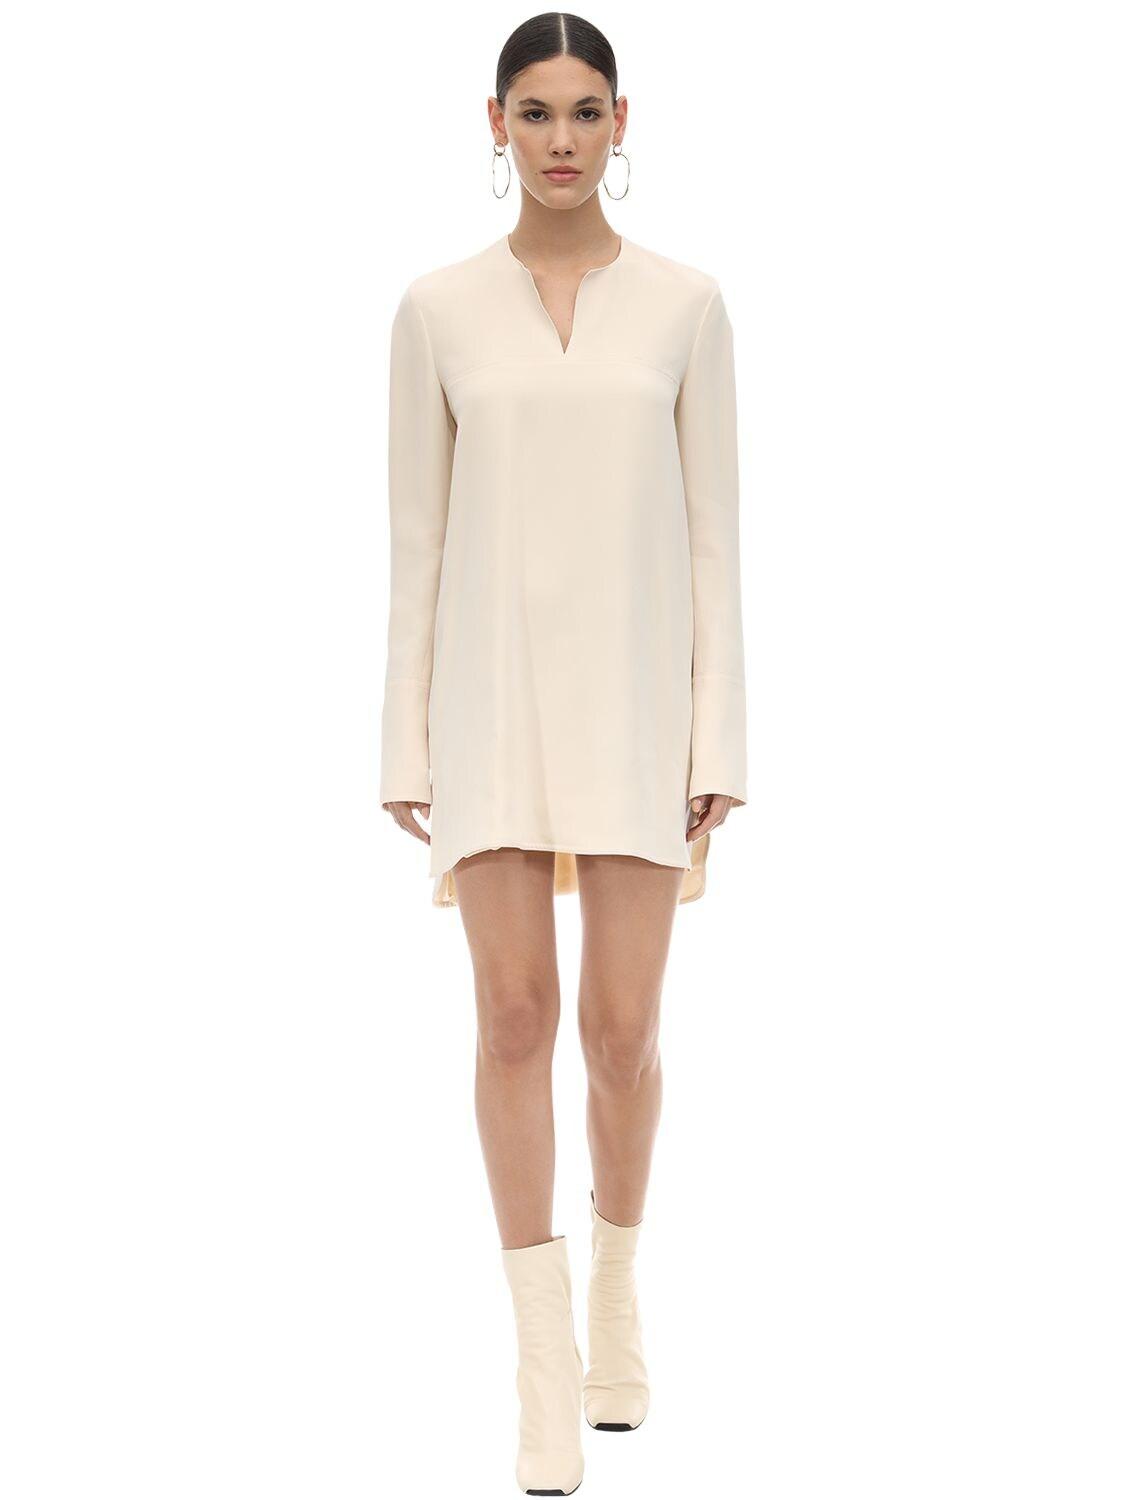 Marni Synthetic Acetate & Viscose Crepe Tunic Dress in Ivory (White) - Lyst